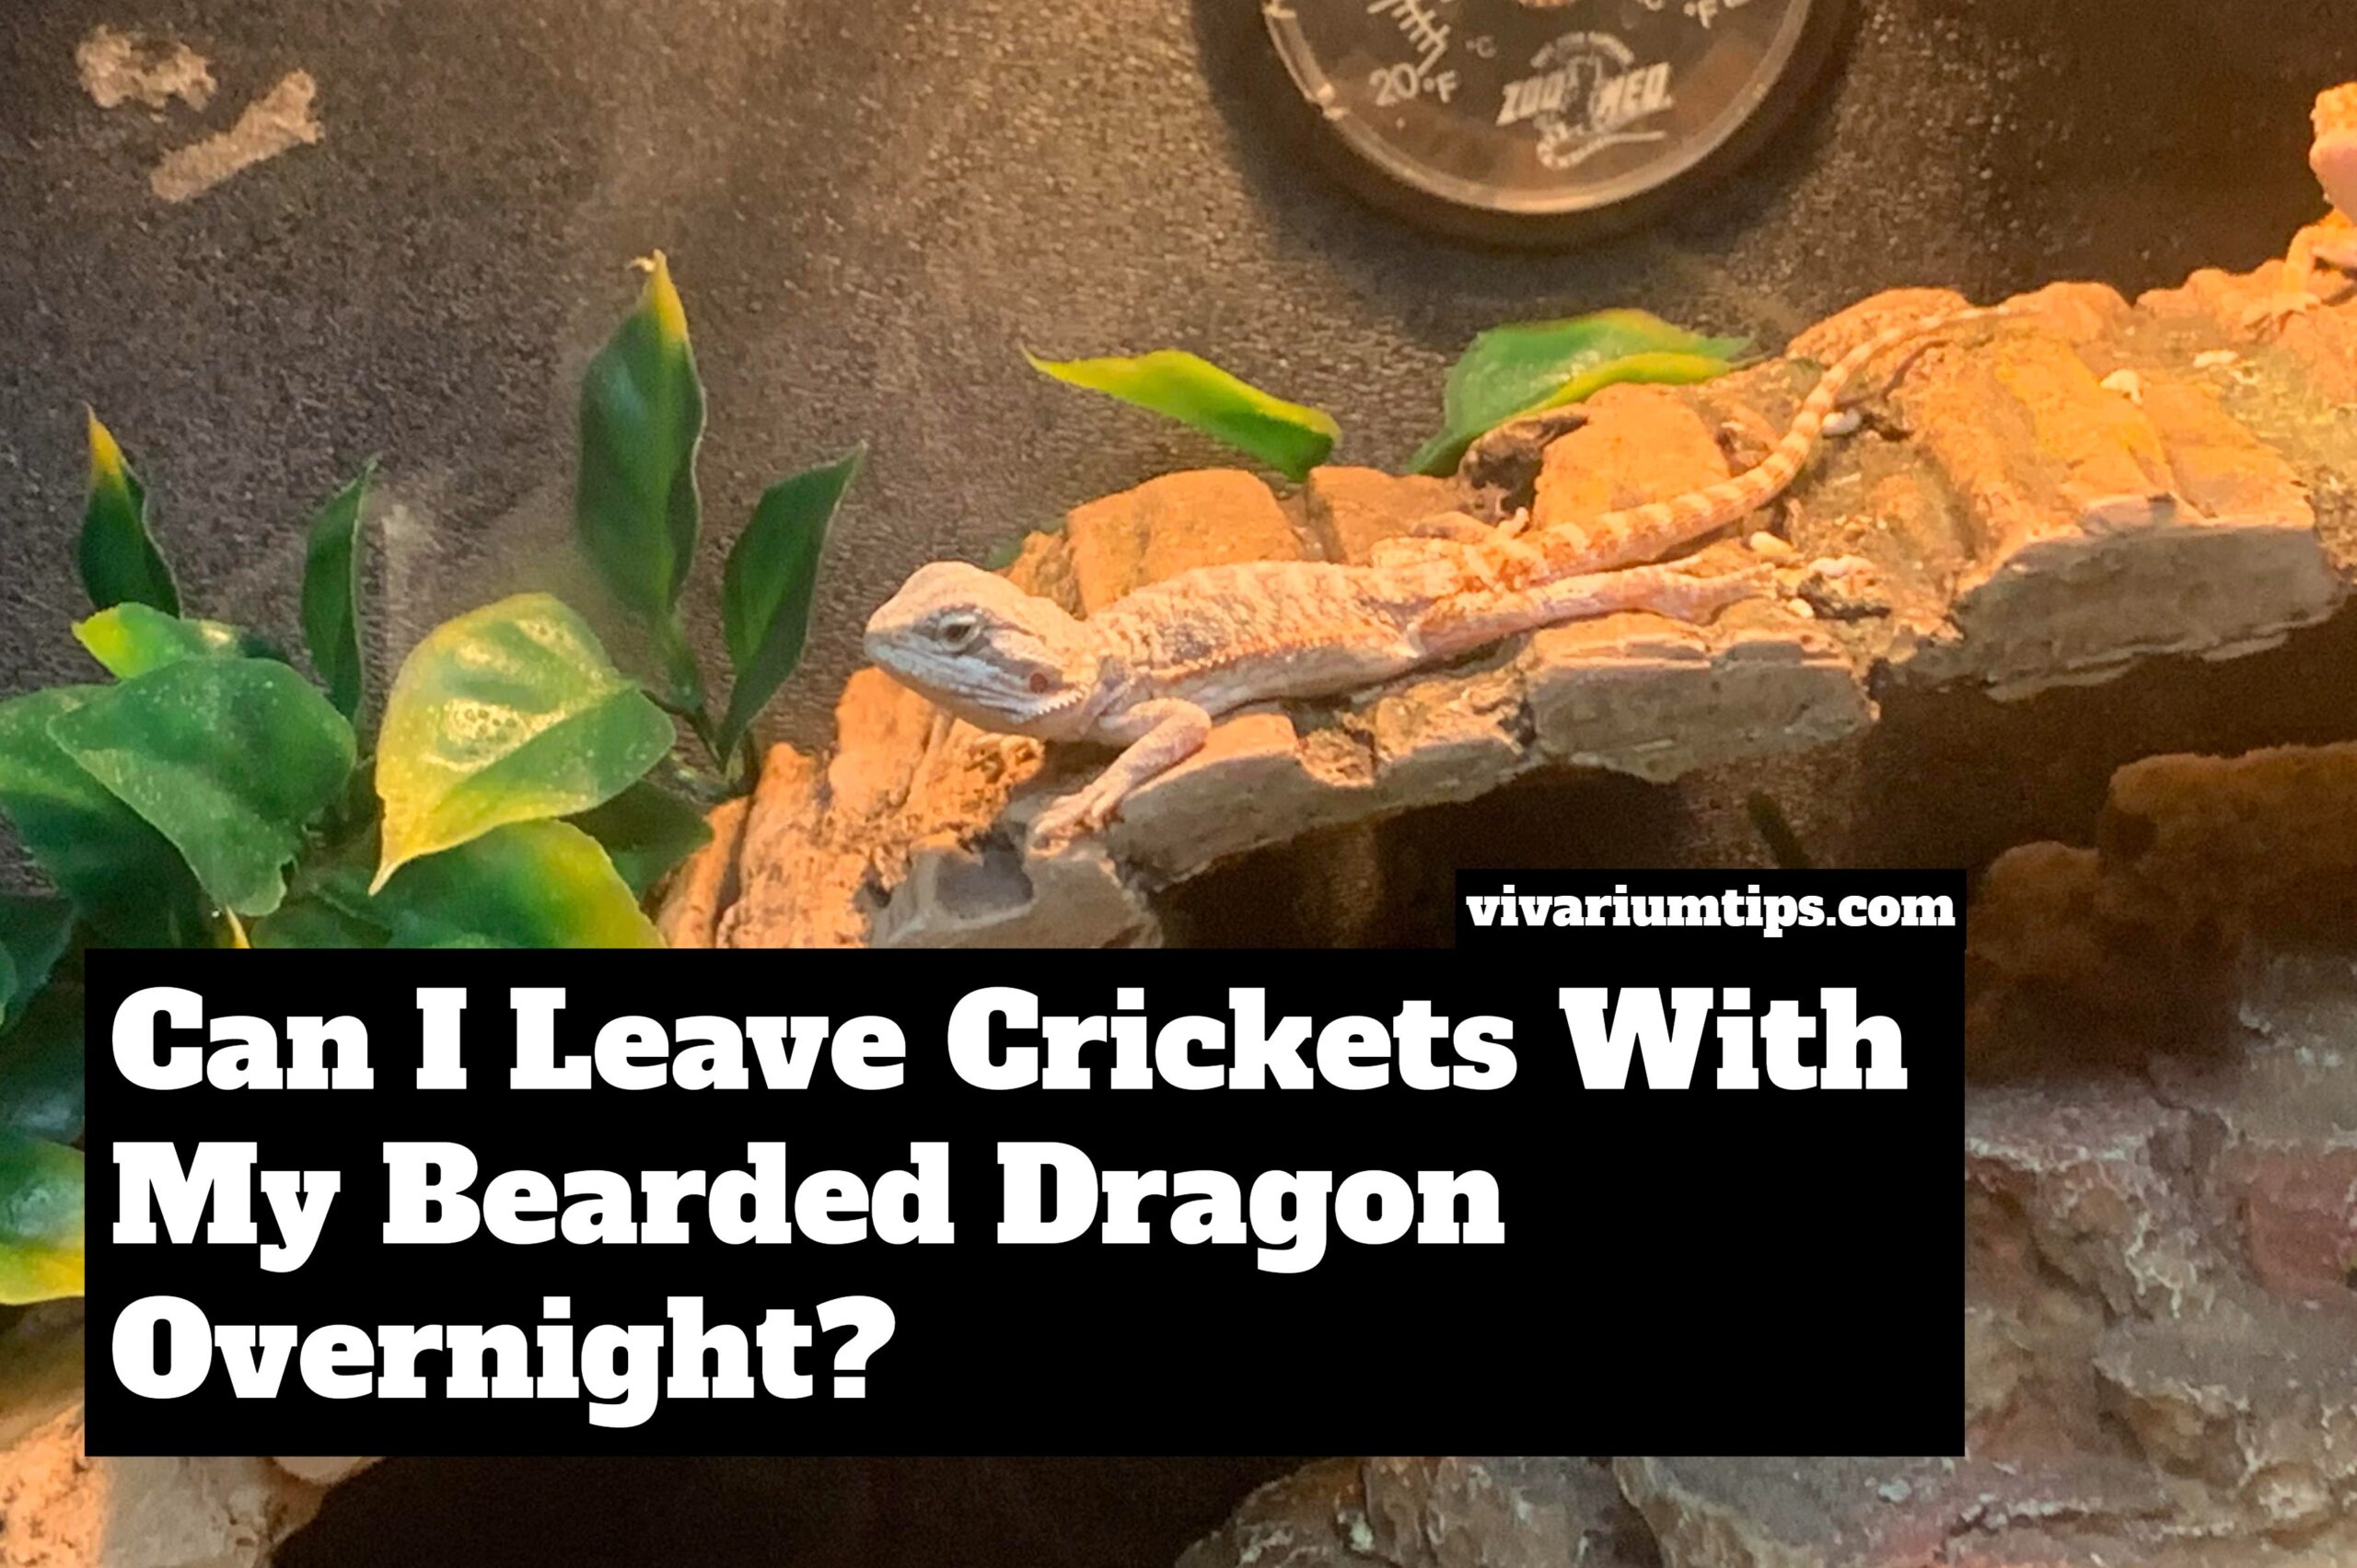 Can I Leave Crickets With My Bearded Dragon Overnight?